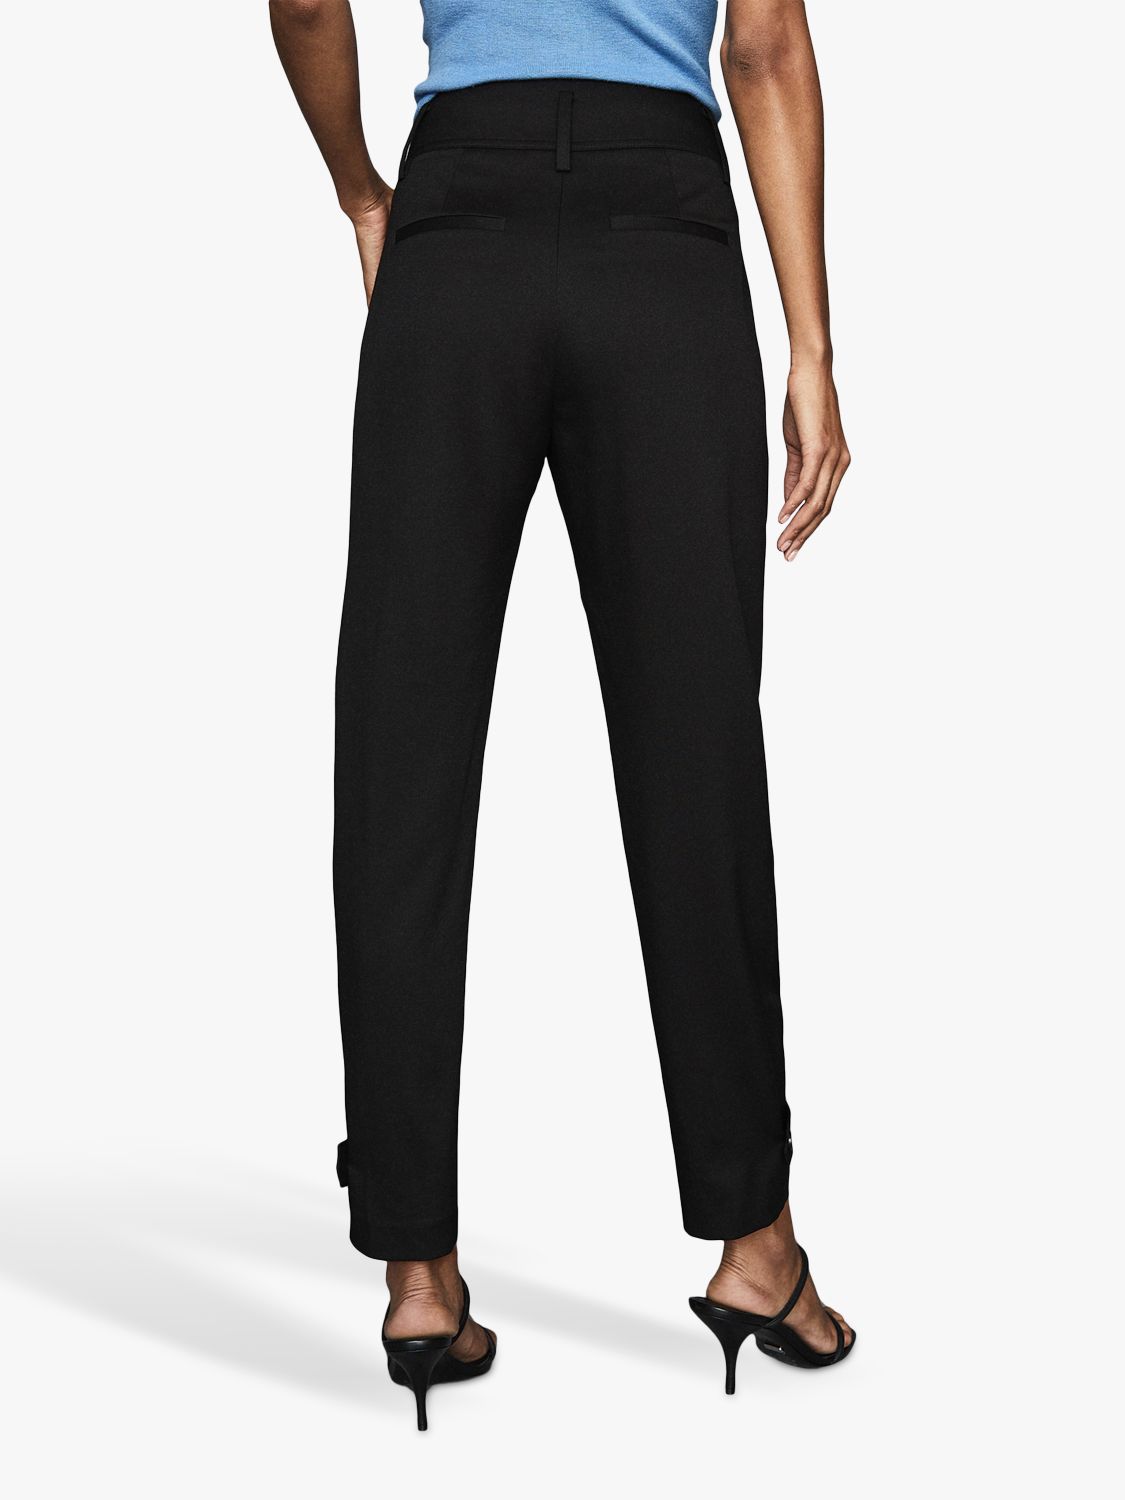 Reiss Madeline Tapered Trousers, Black at John Lewis & Partners